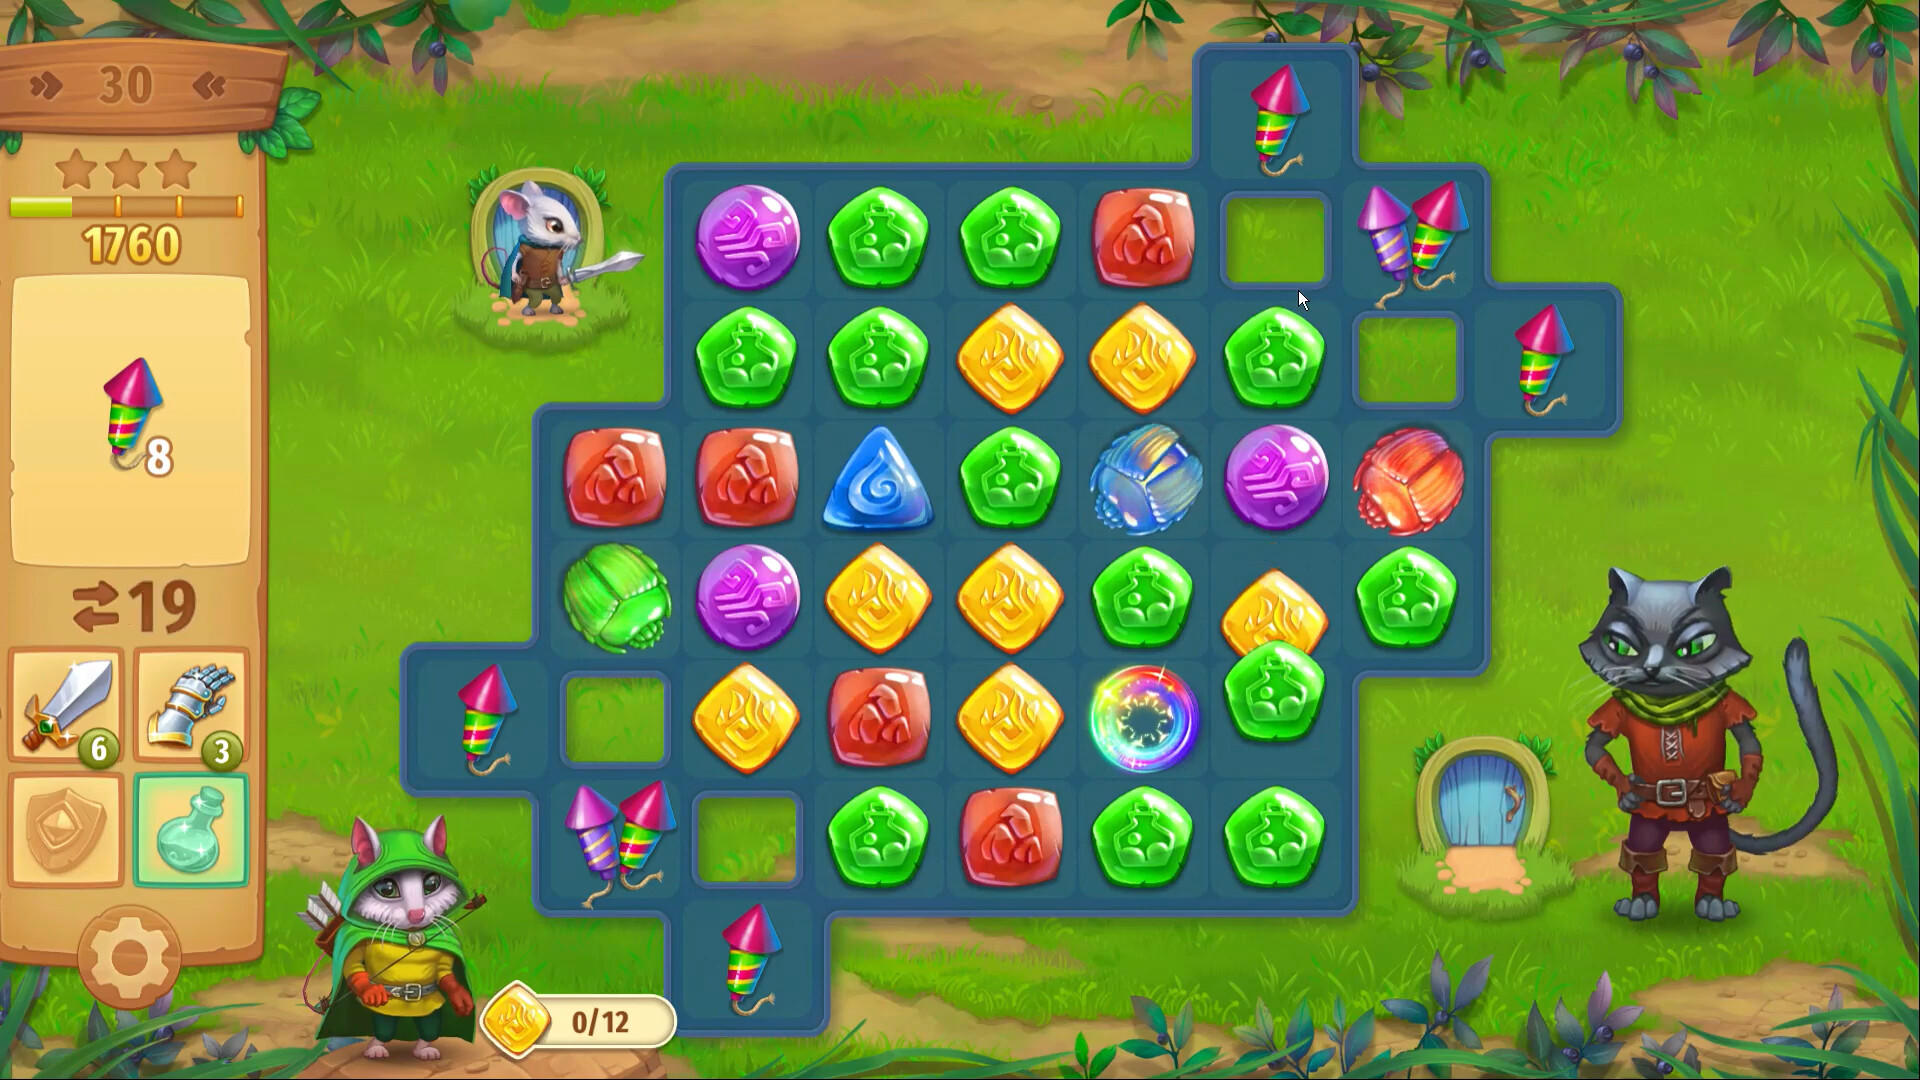 Screenshot 1 of Strongblade - Puzzle Quest at Match-3 Adventure 